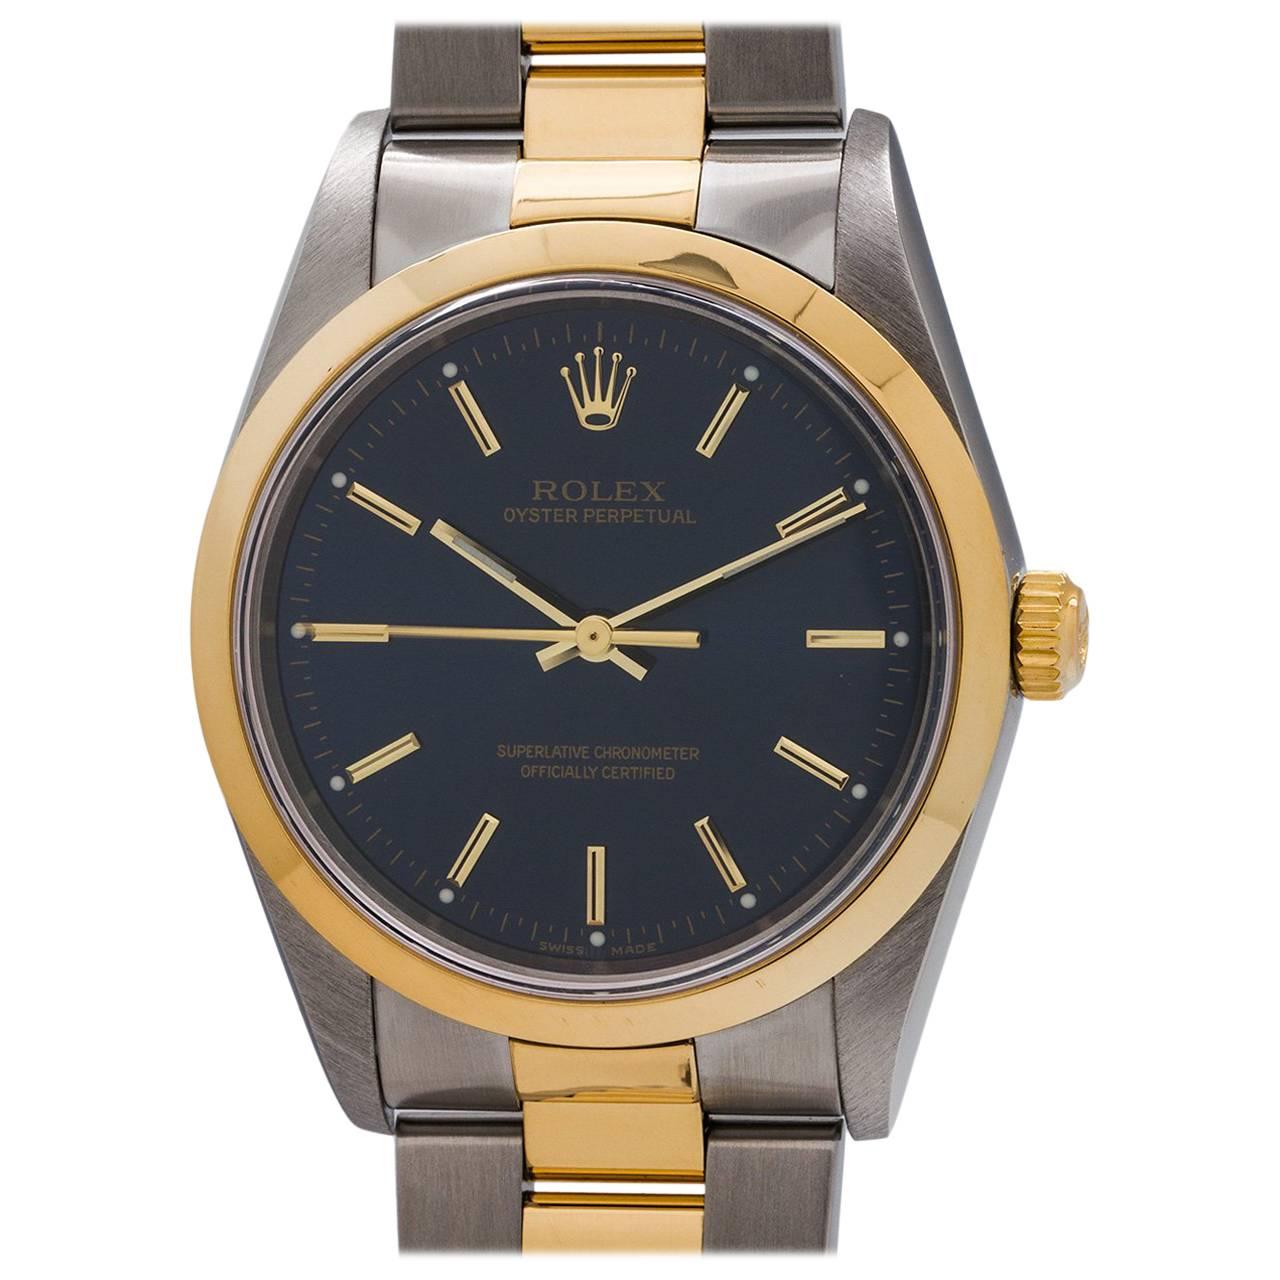 Rolex Yellow Gold Stainless Steel Oyster Perpetual Wristwatch, circa 2003